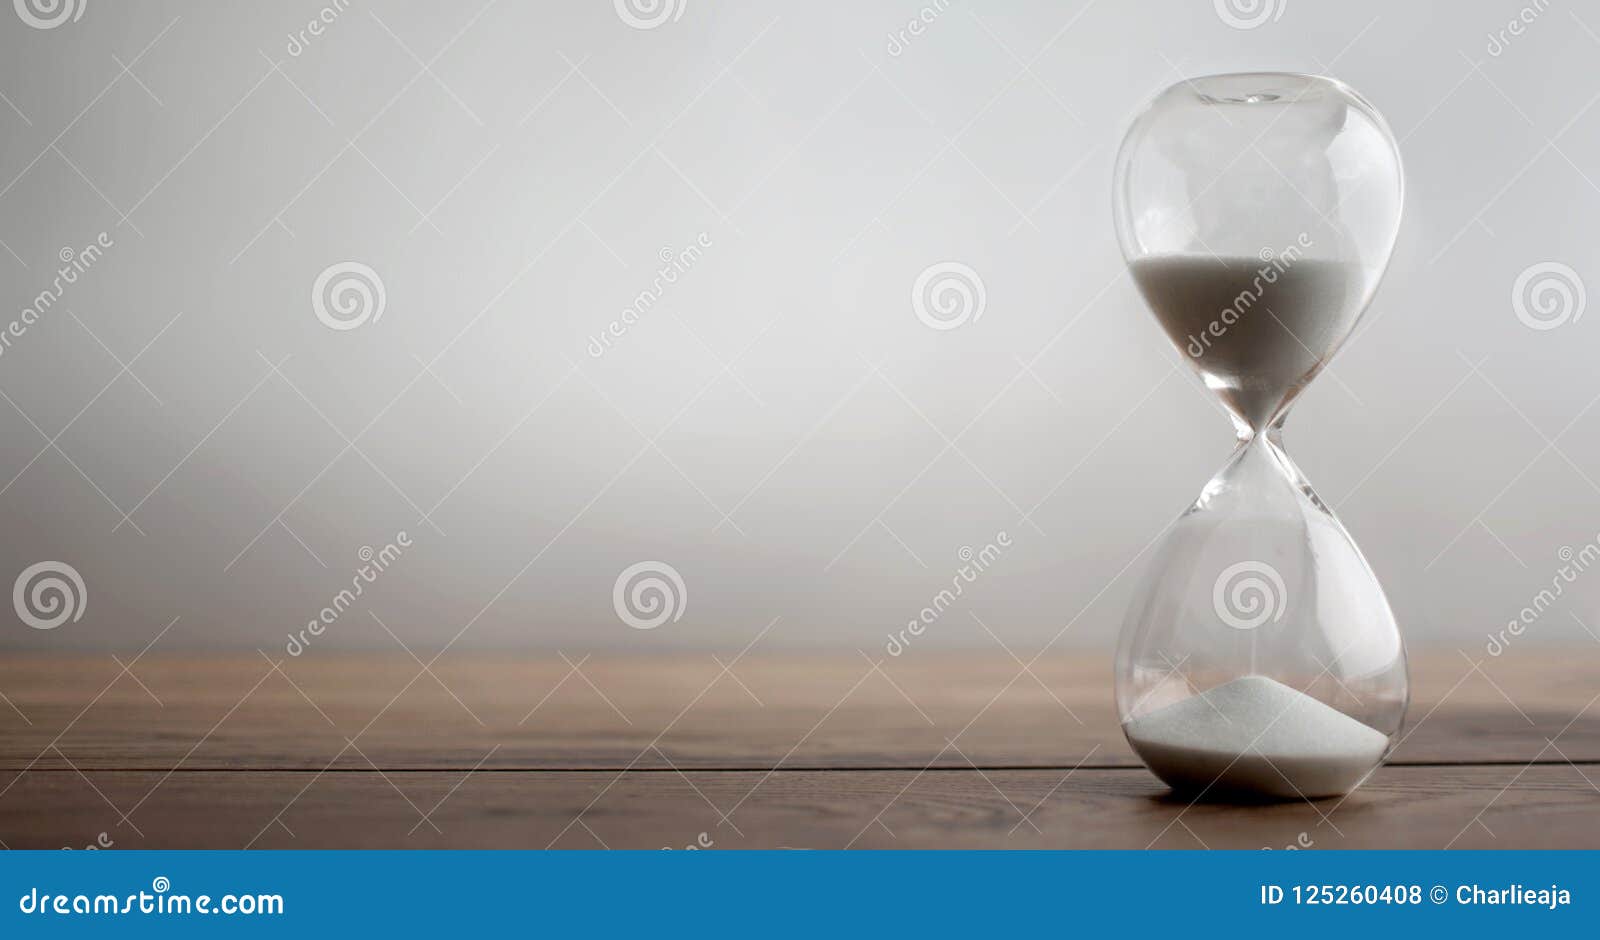 hour glass background